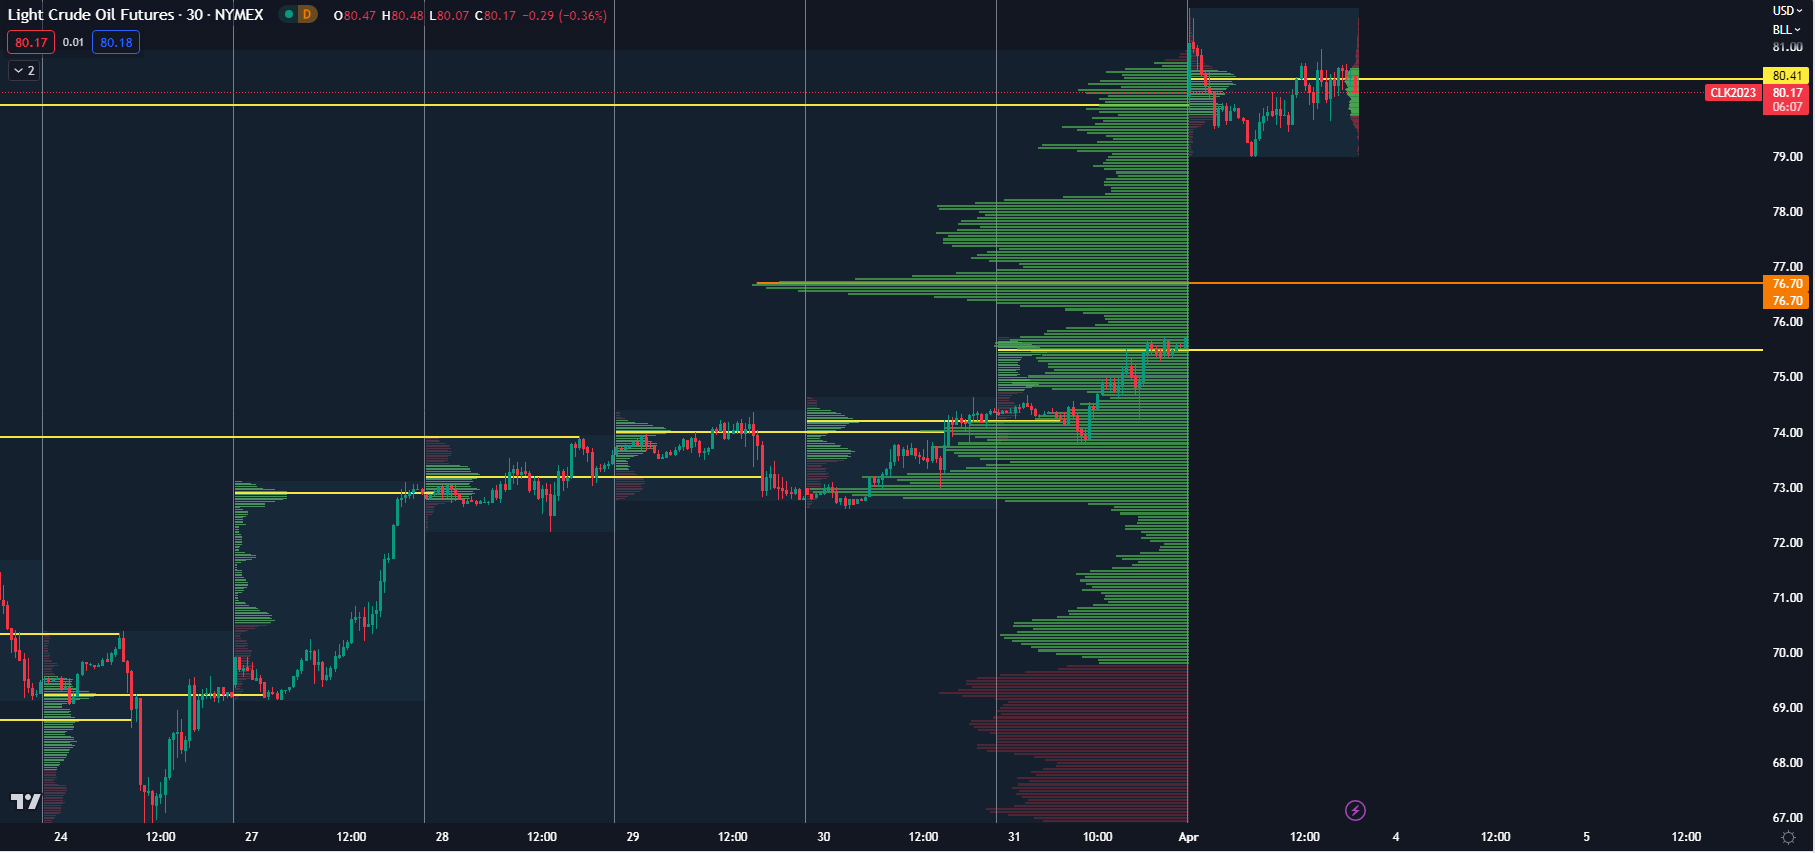 30 minutes chart of CL,  Monthly, and daily Market Profile levels. Source: Author's analysis